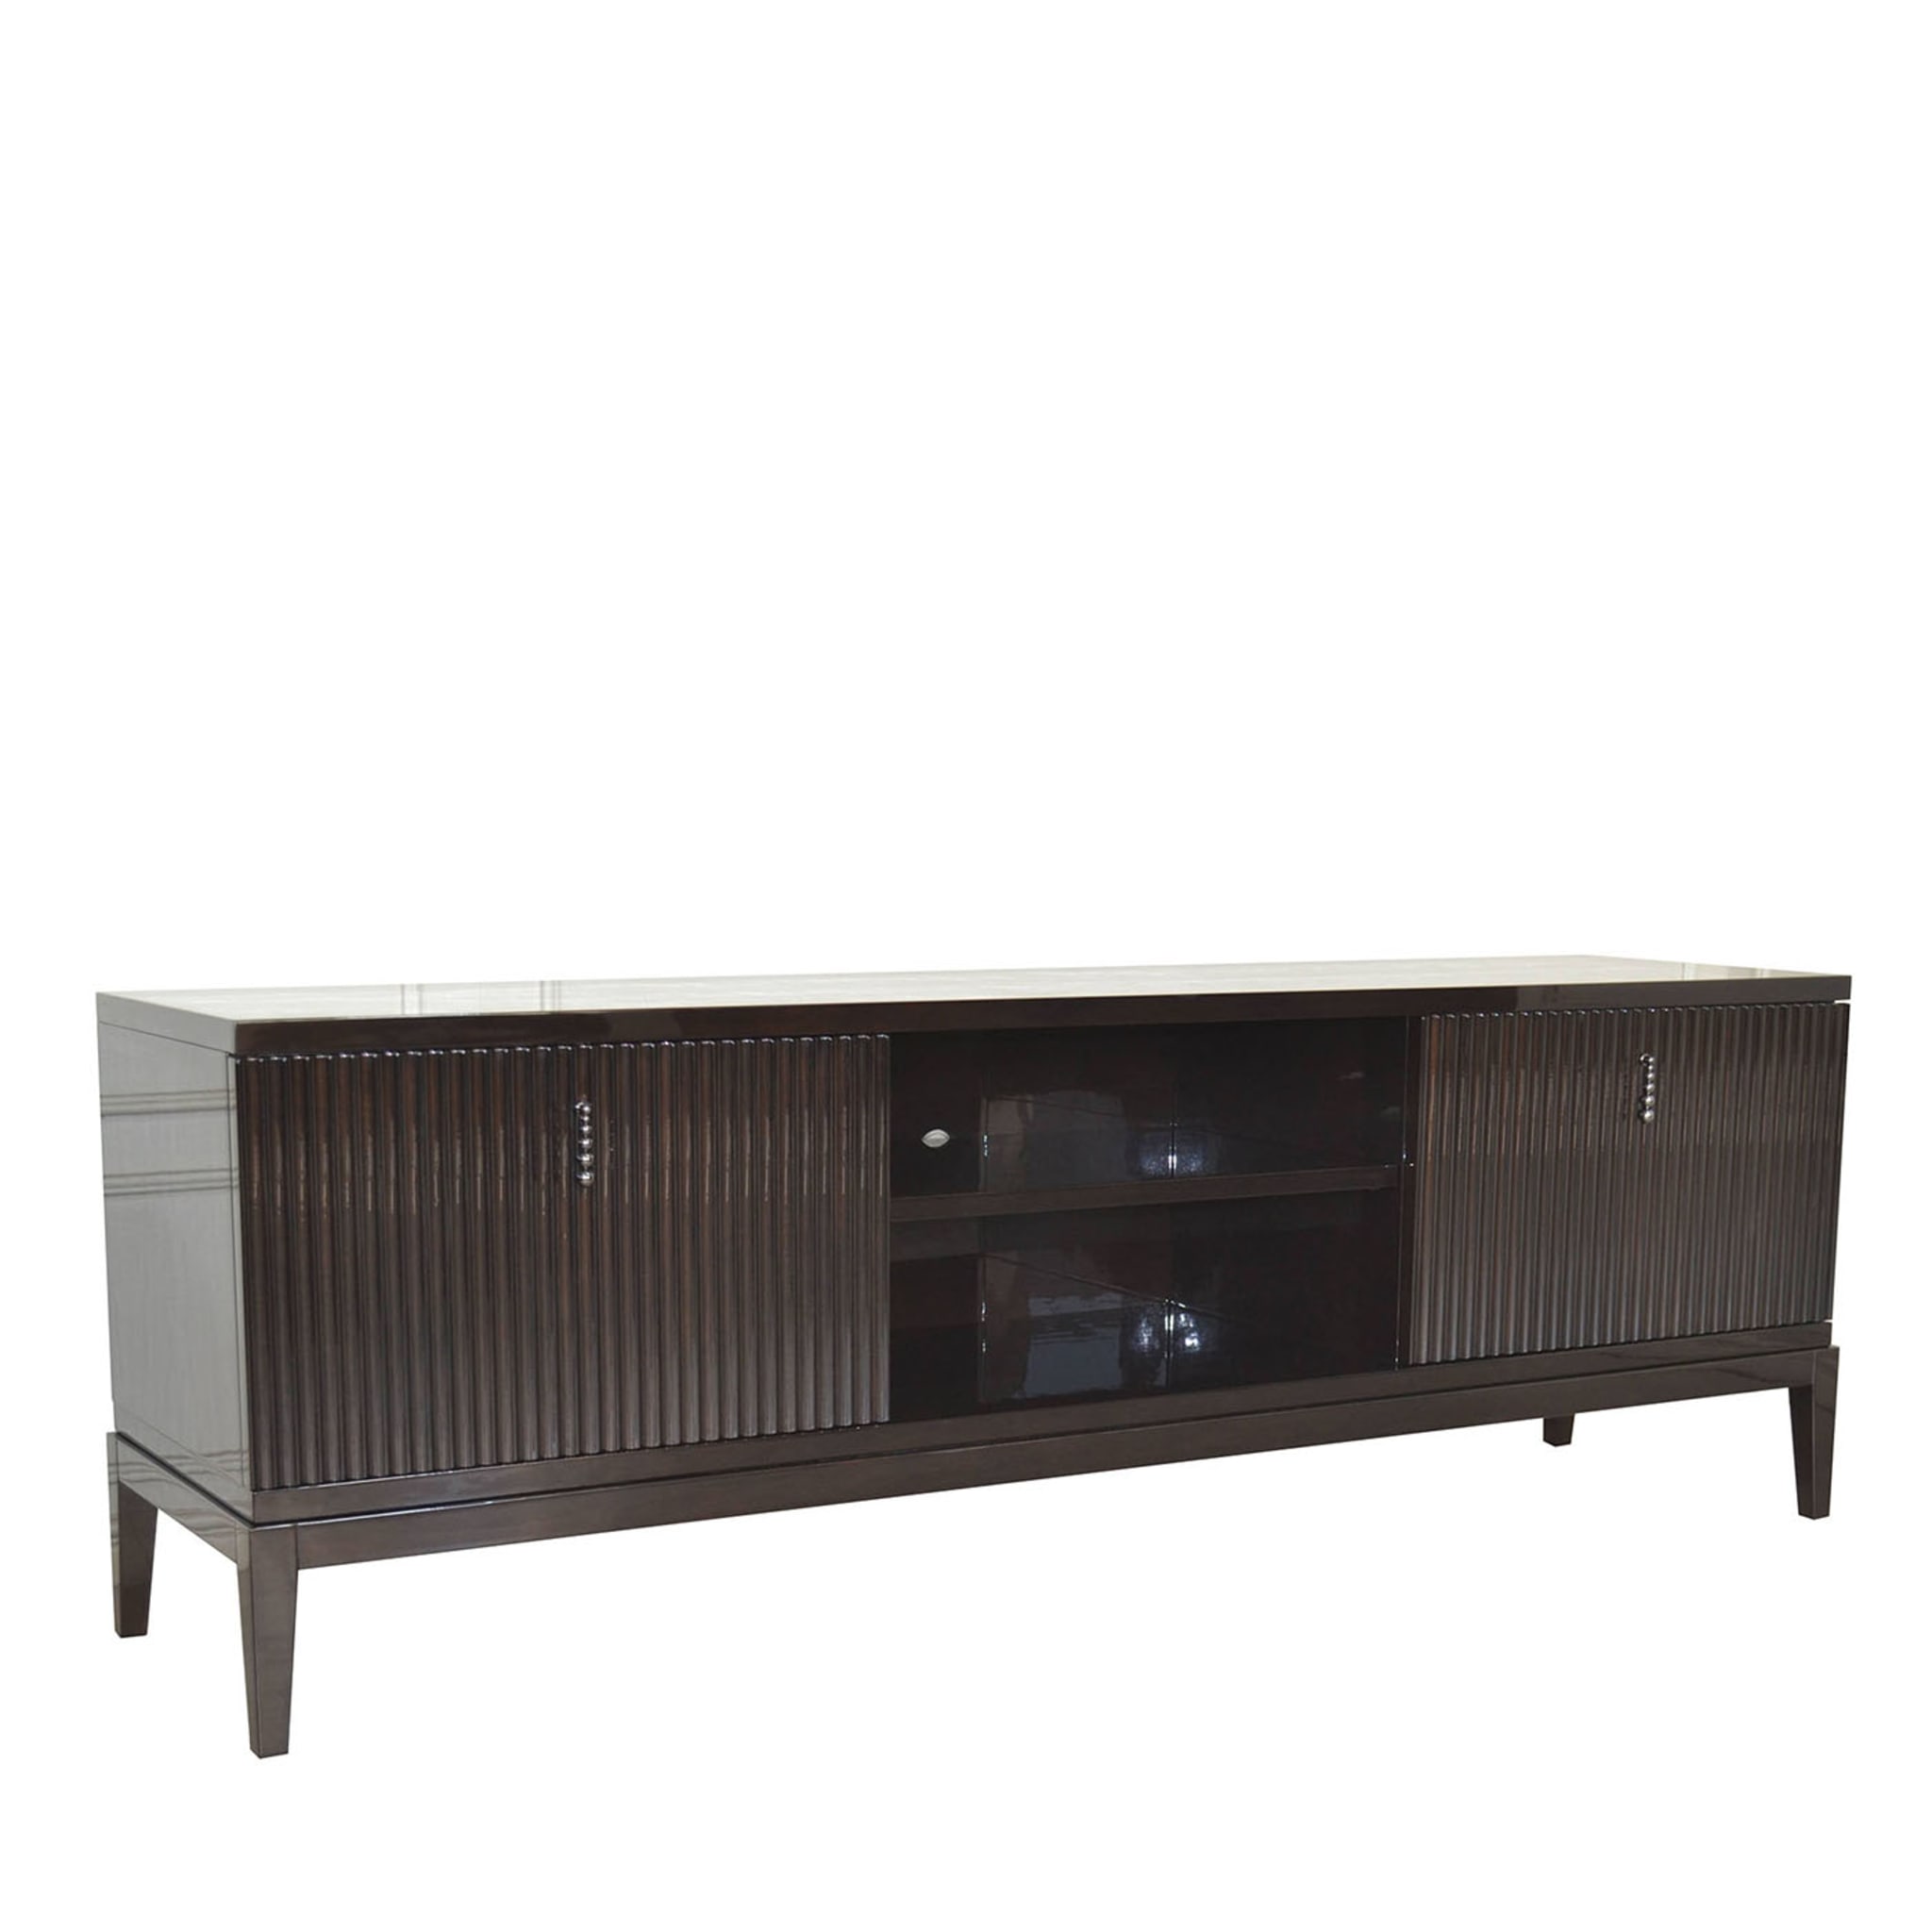 Italian TV Sideboard In Ebony Brown Color With Drawers - Main view